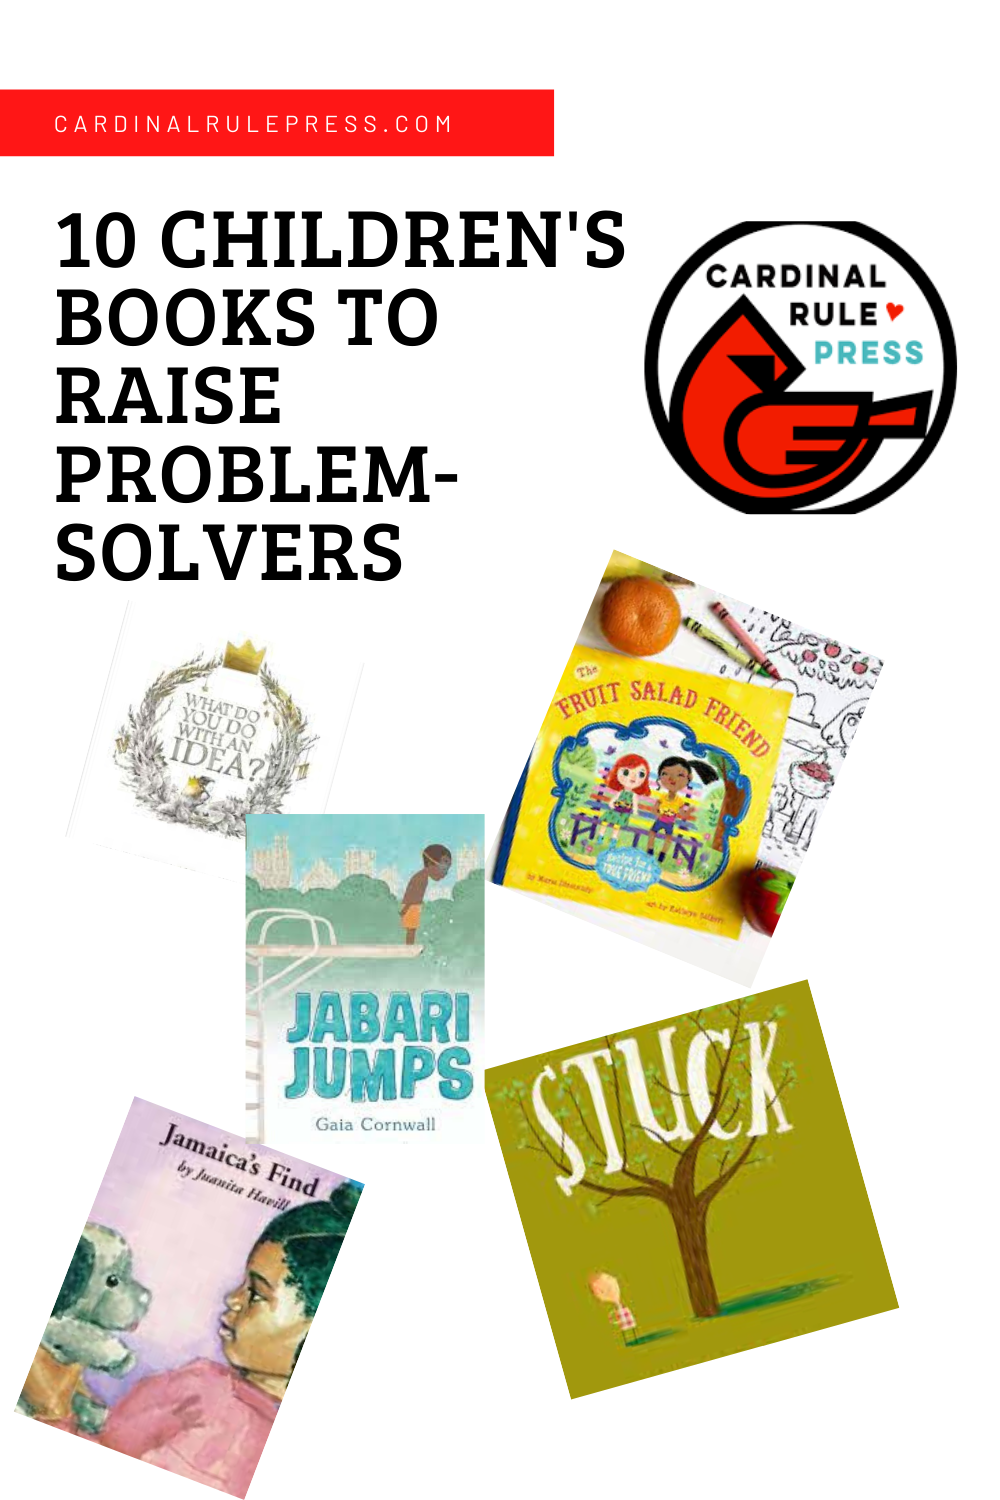 Childrens Books To Raise Problem Solvers-Whether in the classroom, on the sports field, or at home, problem-solving helps kids thrive. These ten children’s books promote everyday problem-solving and resiliency, whether the issue be a missing toy or a struggling friendship.
#ChildrensBooks #PictureBooks #ProblemSolvers #BooksToRead #BooksWorthReading #CharacterTraits